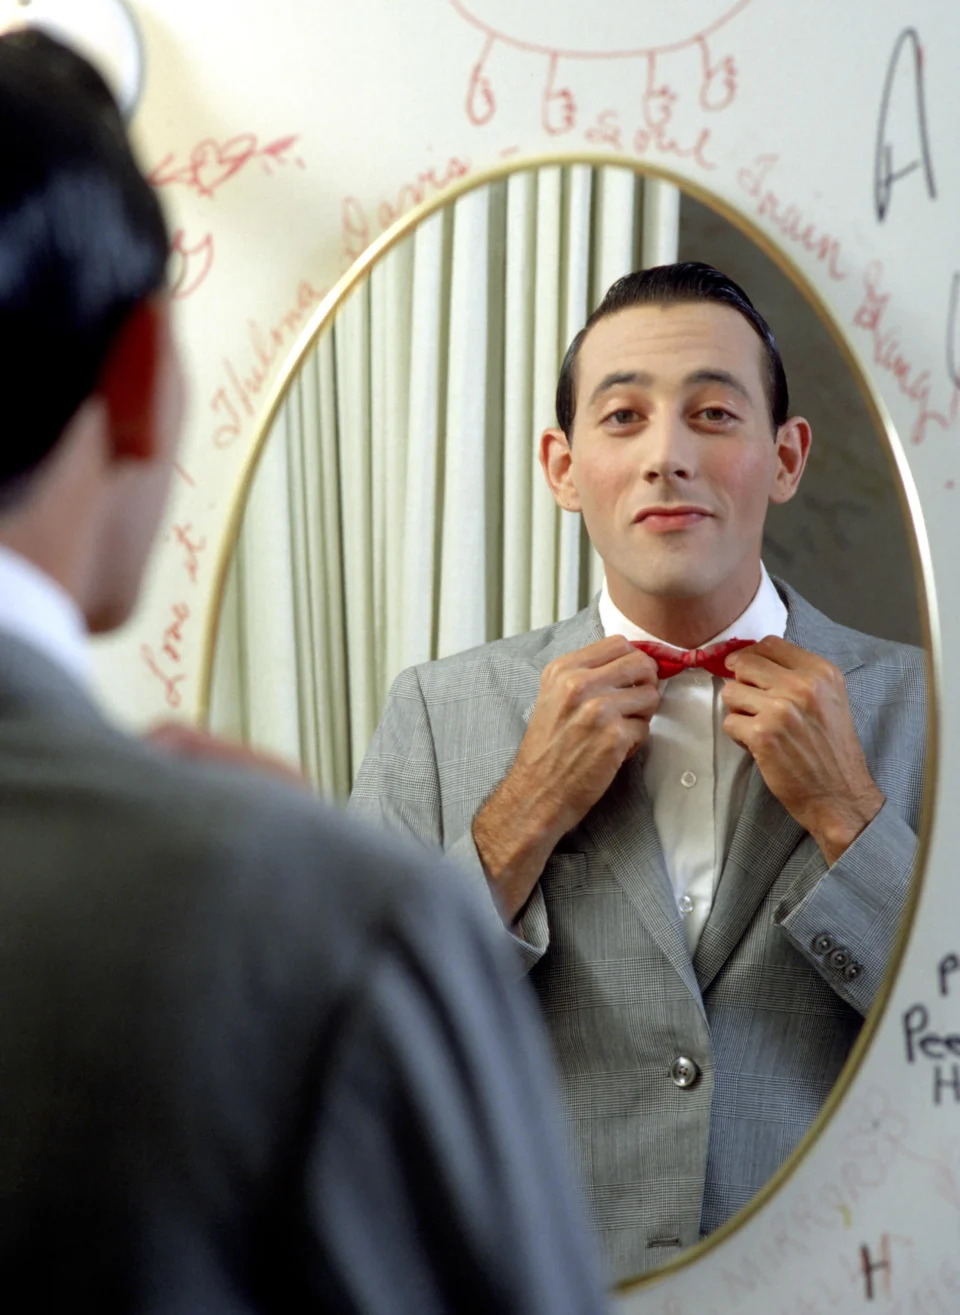 Paul Reubens looks at the camera through the reflection of a mirror as character Pee-wee Herman.